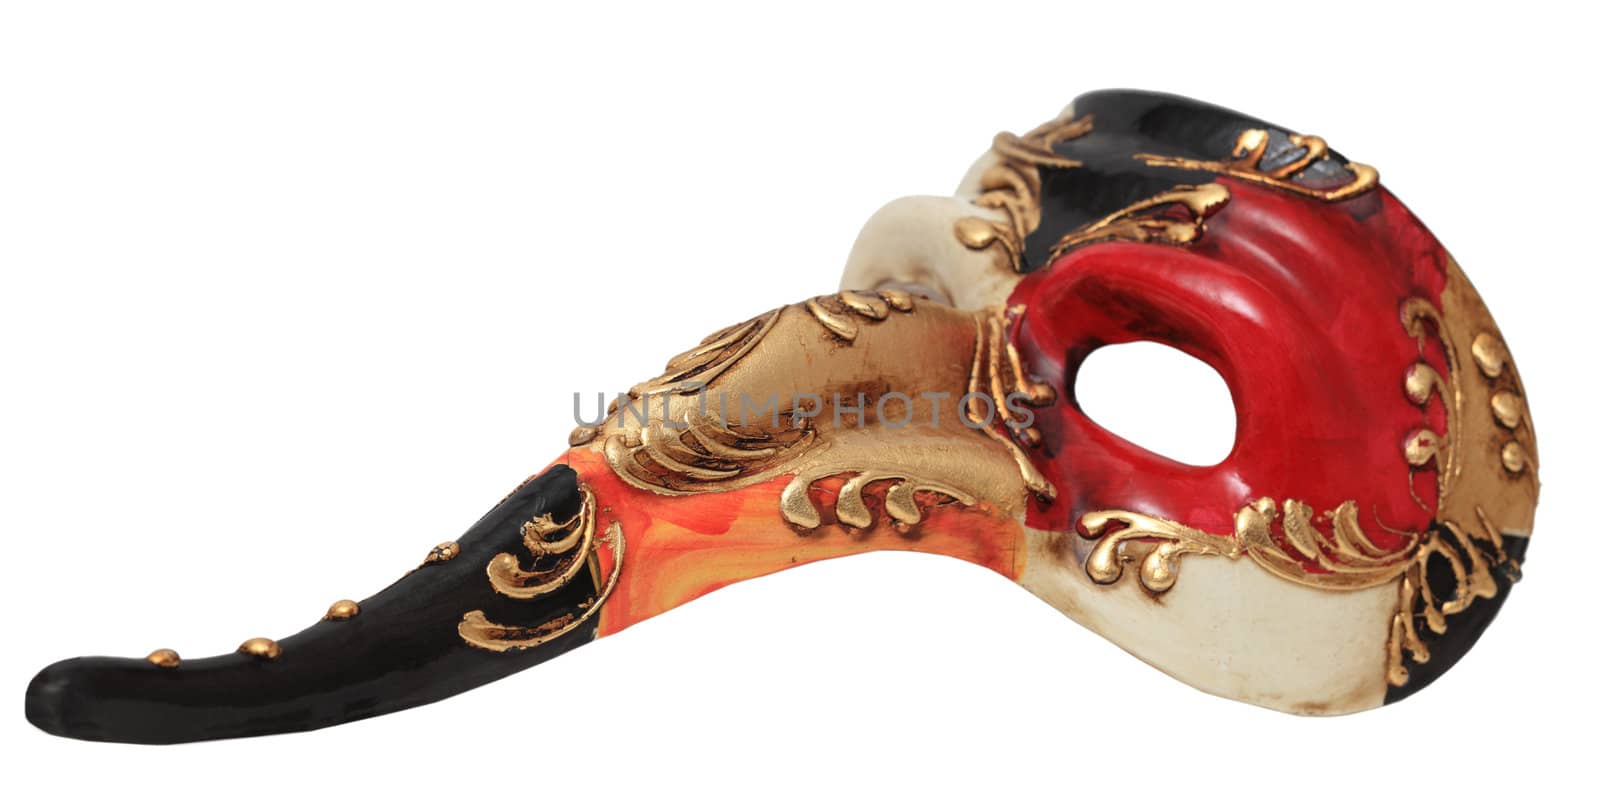 Image of a colorful long nose Venetian mask against a white background.